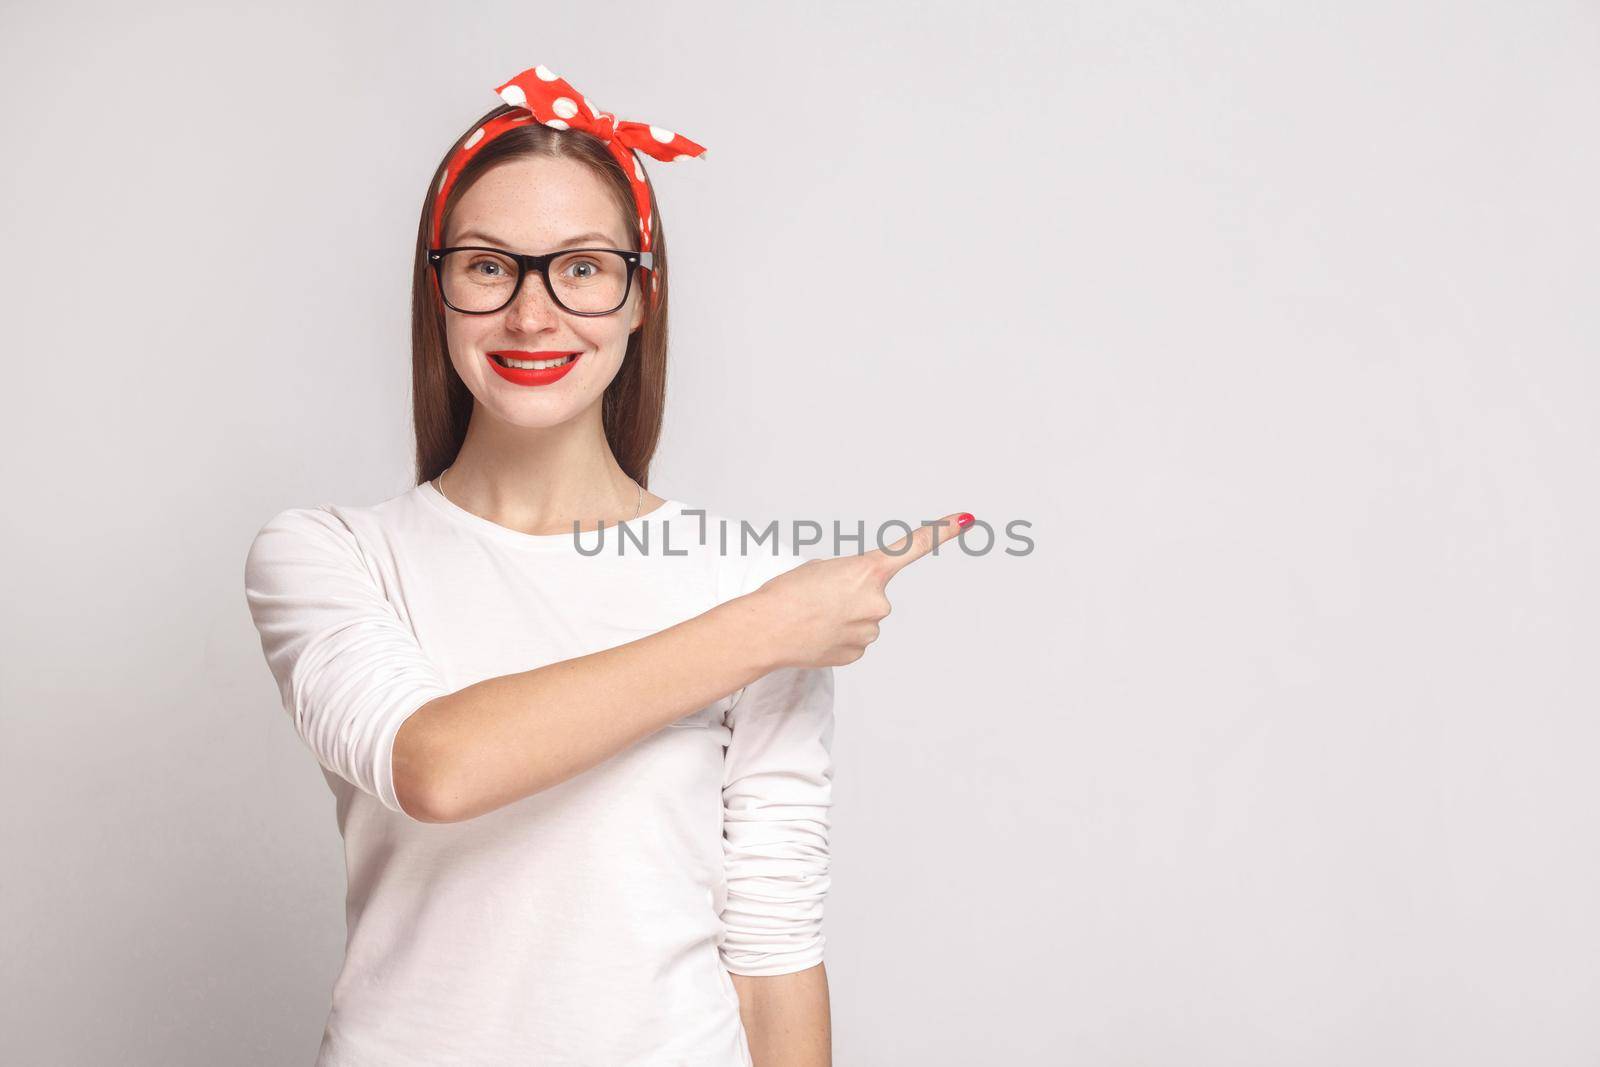 look at this side. pointing finger. portrait of beautiful emotional young woman in white t-shirt with freckles, glasses, red lips and head band. indoor studio shot, isolated on light gray background.